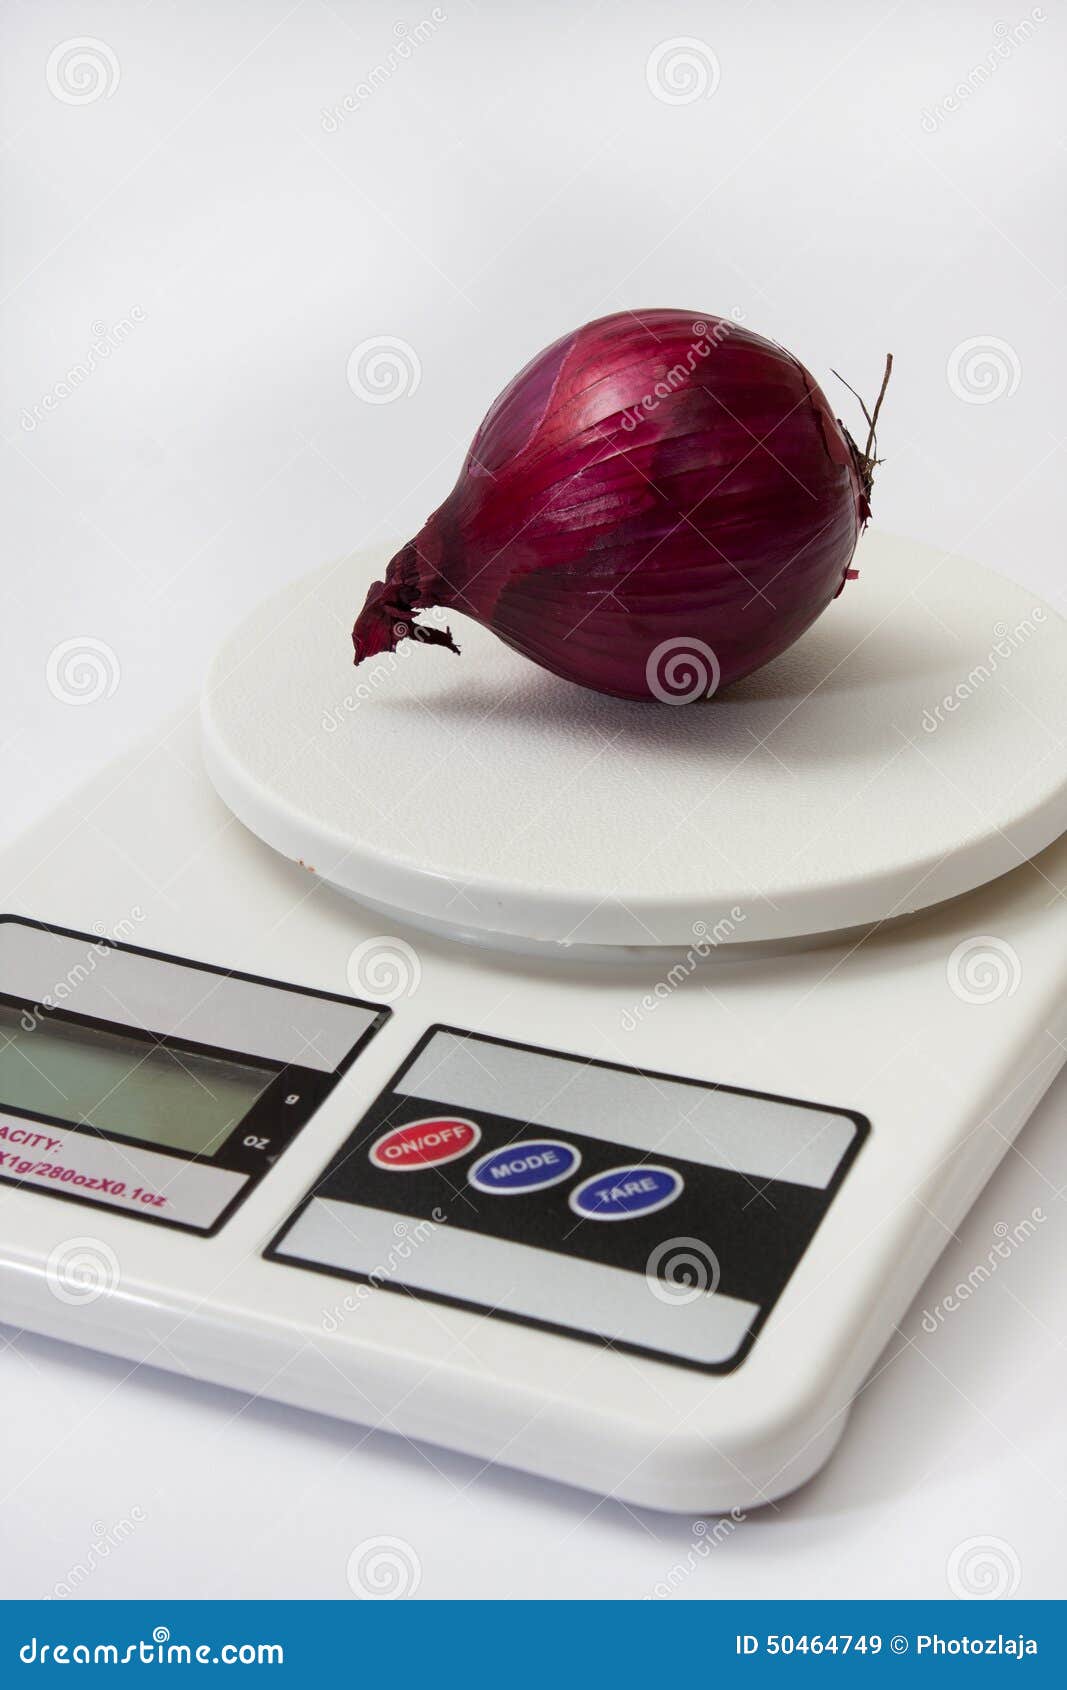 Red Onion on a Digital White Kitchen Scale Stock Image - Image of